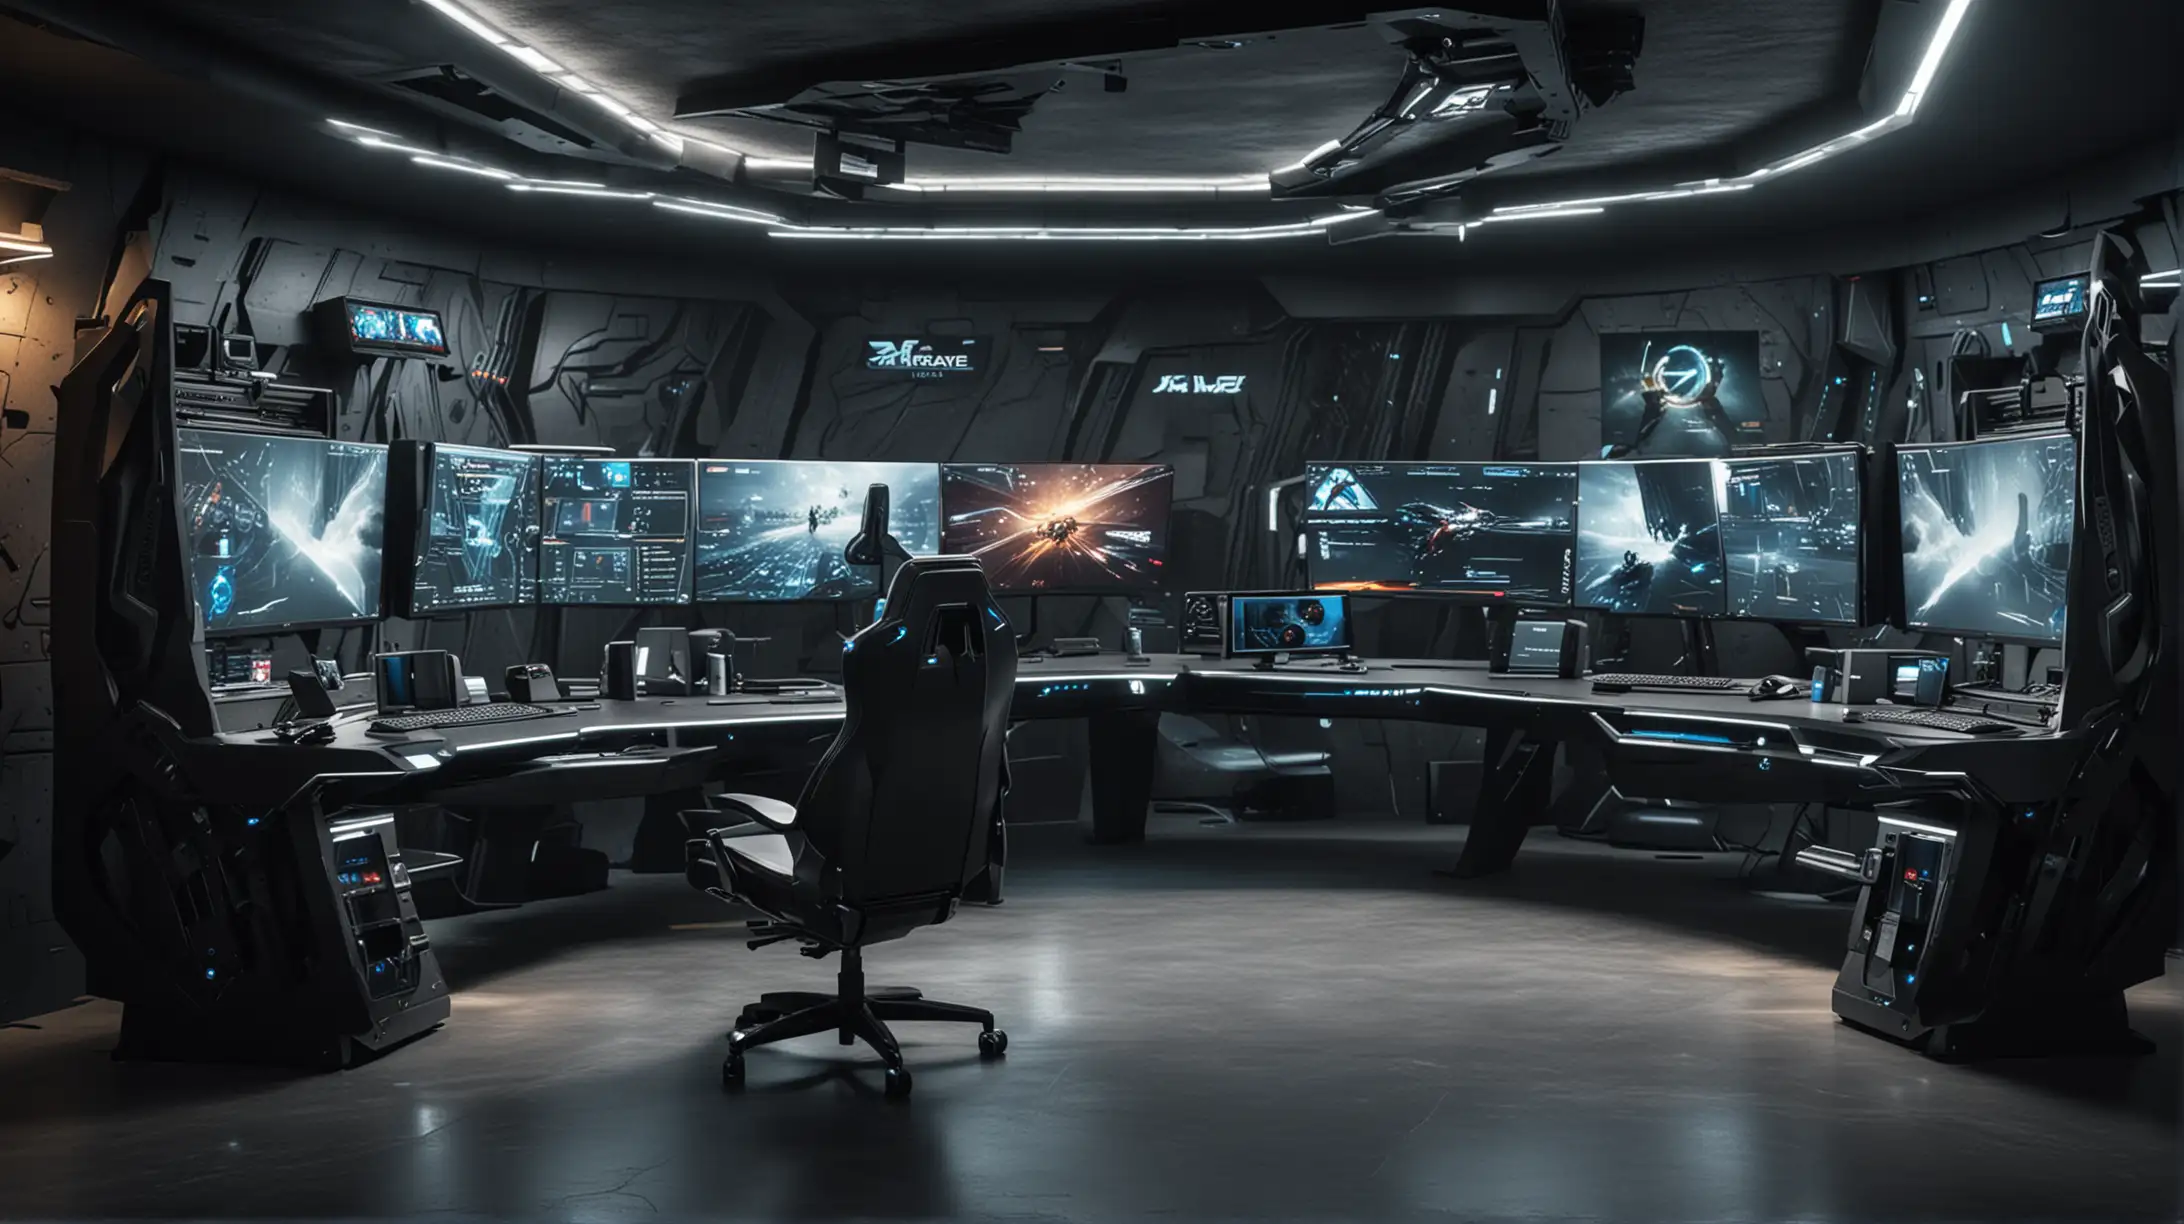 Elaborate and tech sleek  super-computer desk setup and playroom design mimicking the aesthetics of the Batcave with Futuristic Ergonomic Gaming Computer Cockpit Station with Ultra wide screens